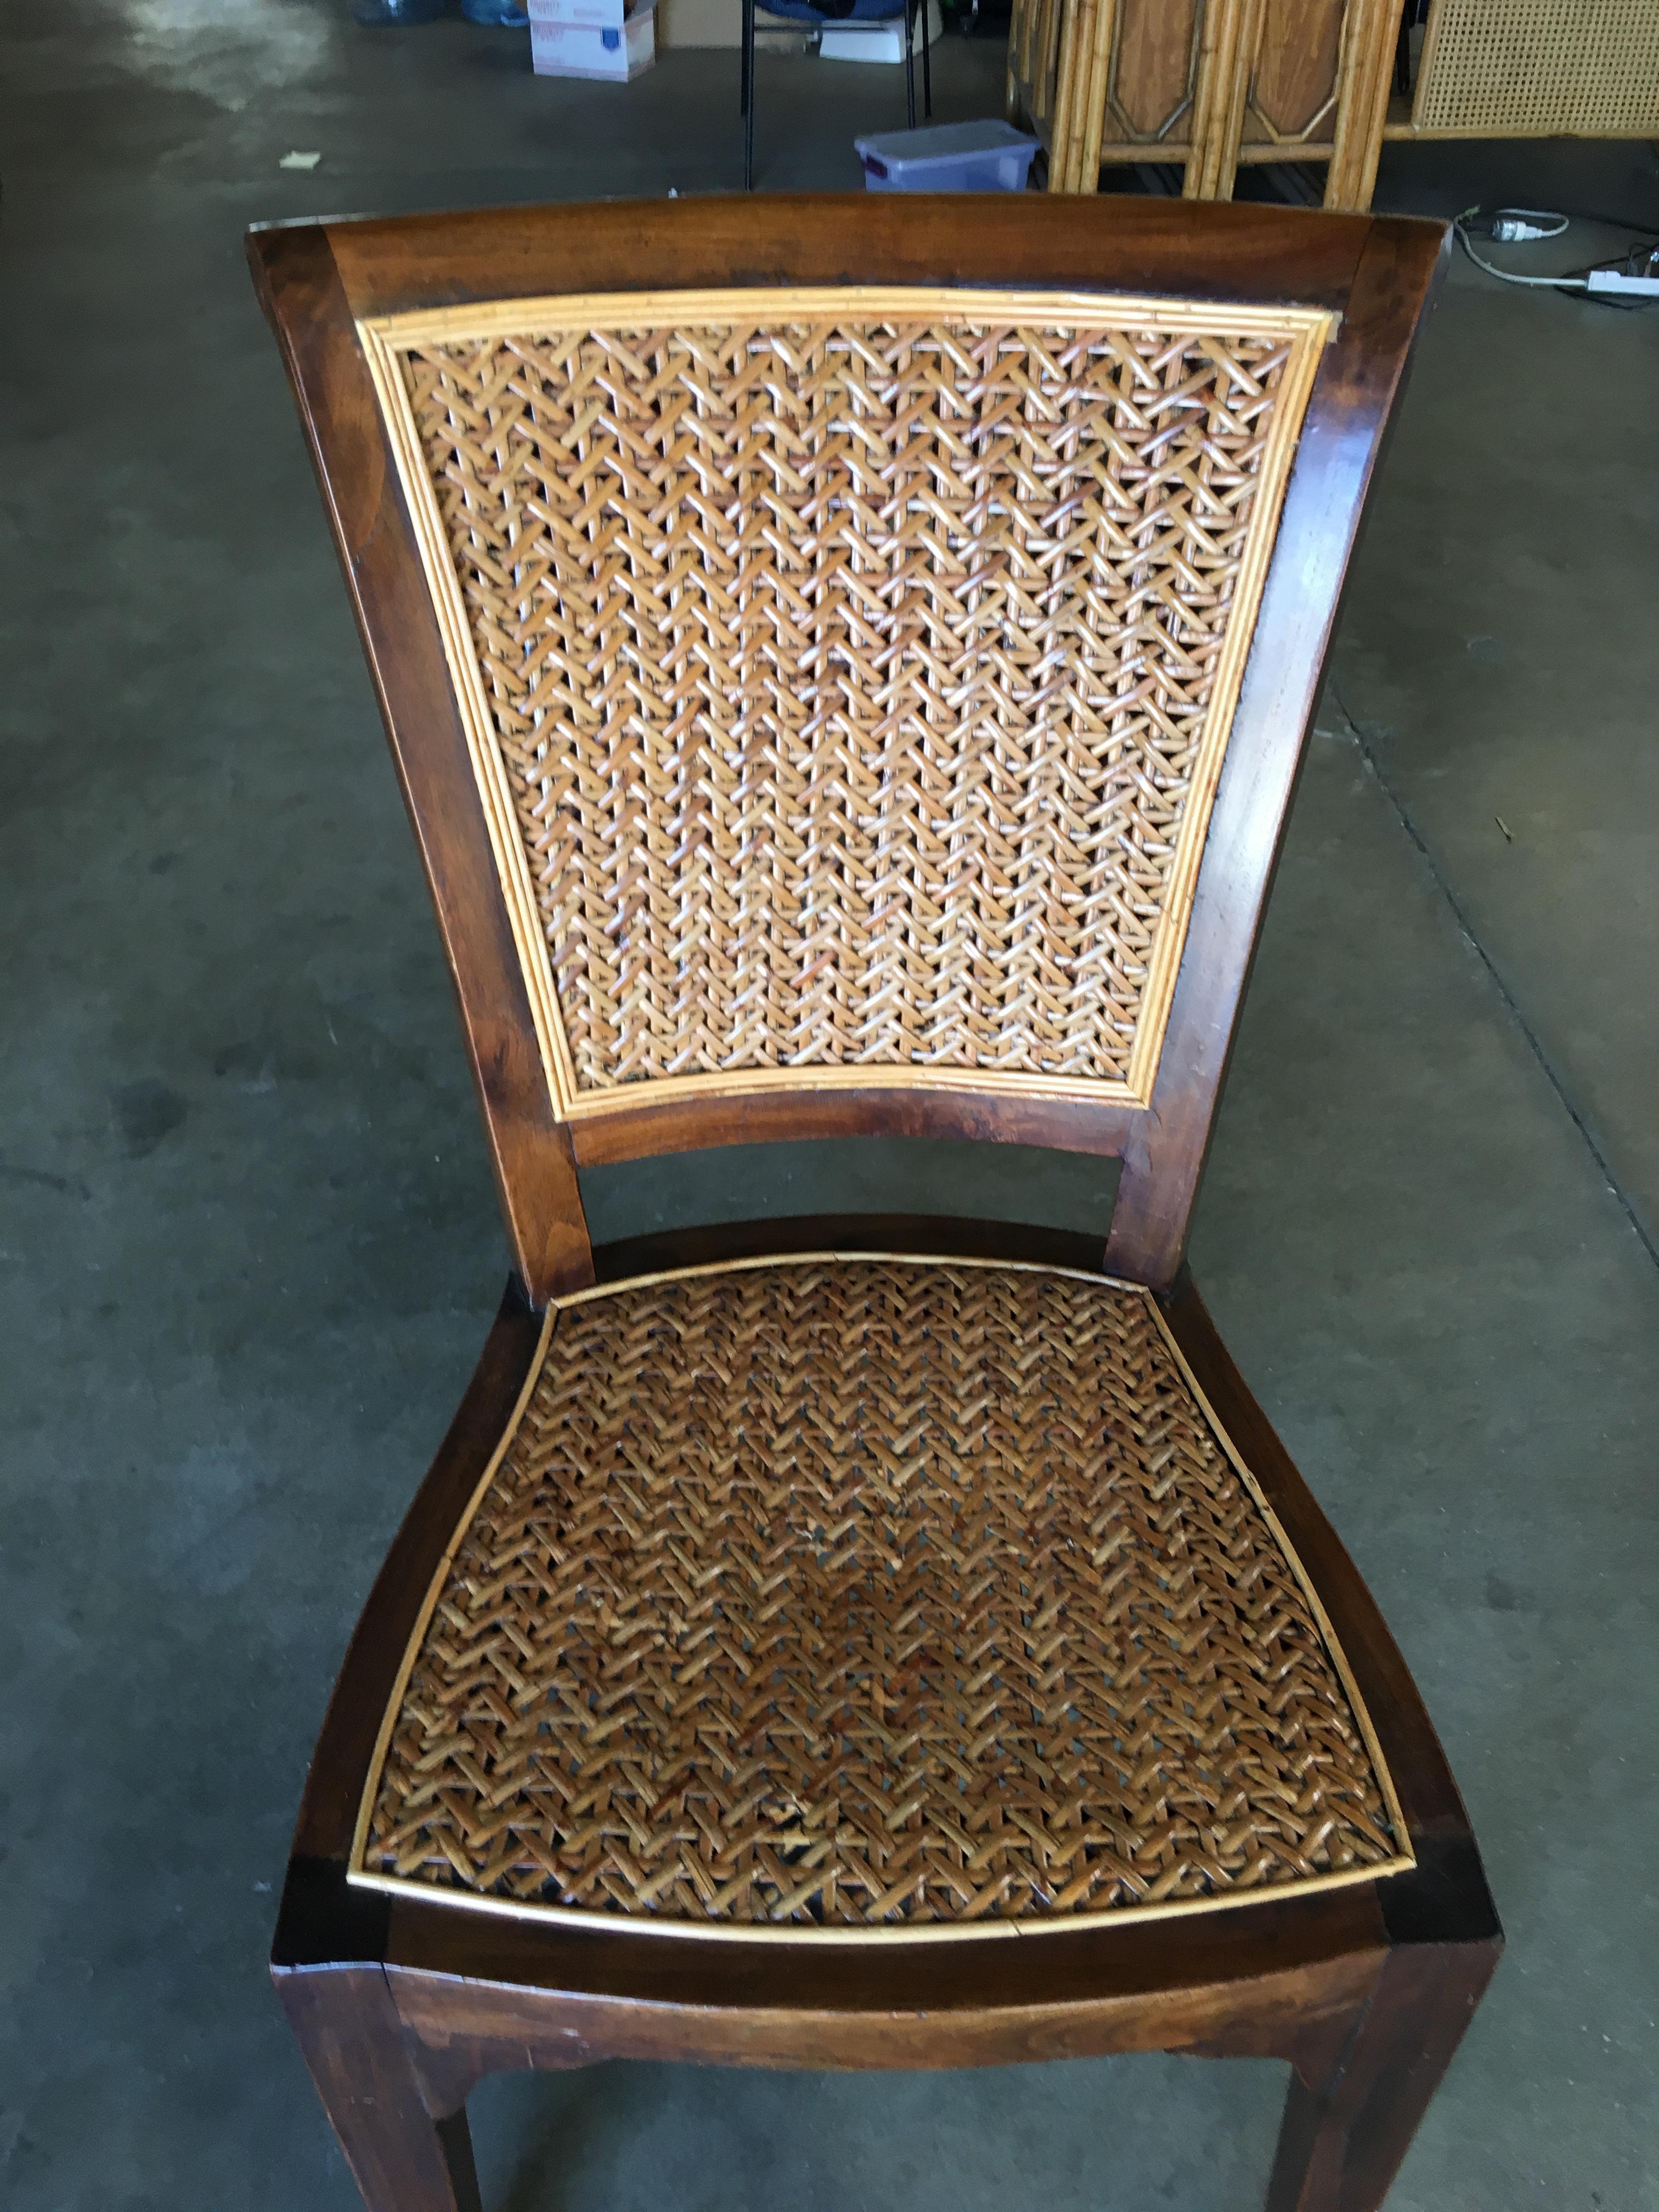 Mid-20th Century High Style Midcentury Mahogany Dining Chair with Woven Wicker Seat